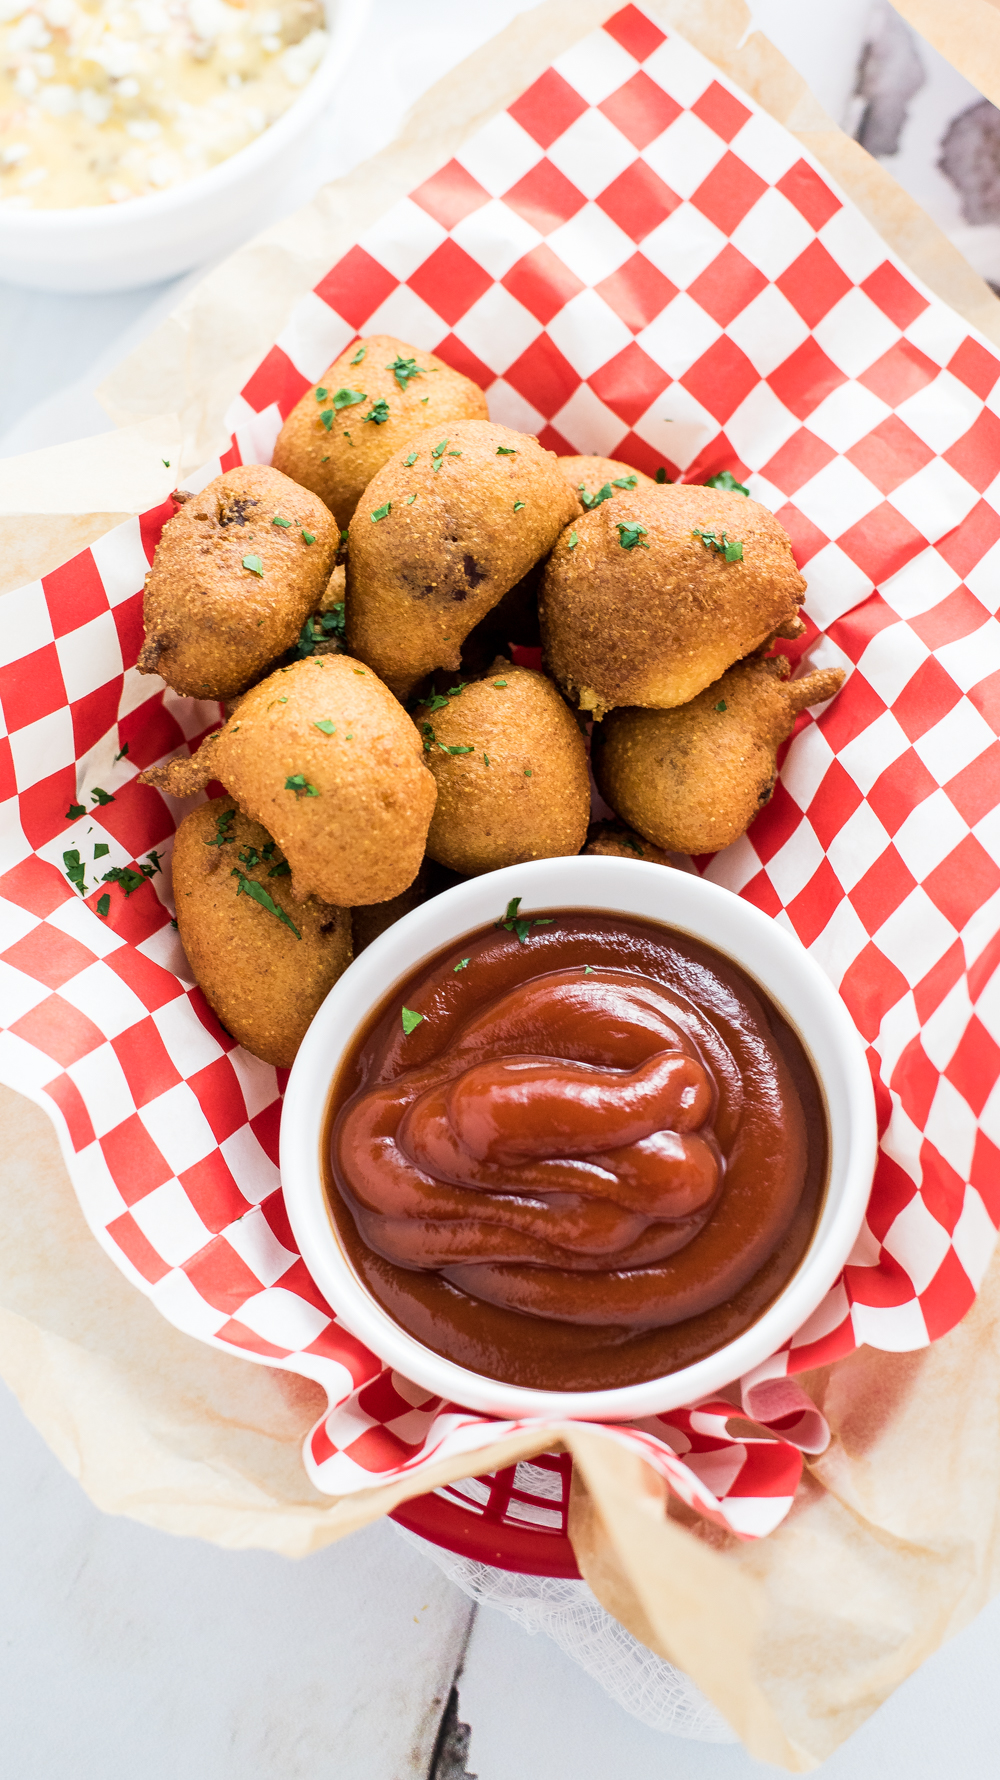 Chili cheese corn dogs are a fun twist on the classic finger food. They are bite-sized morsels that are smothered in a homemade beef queso!